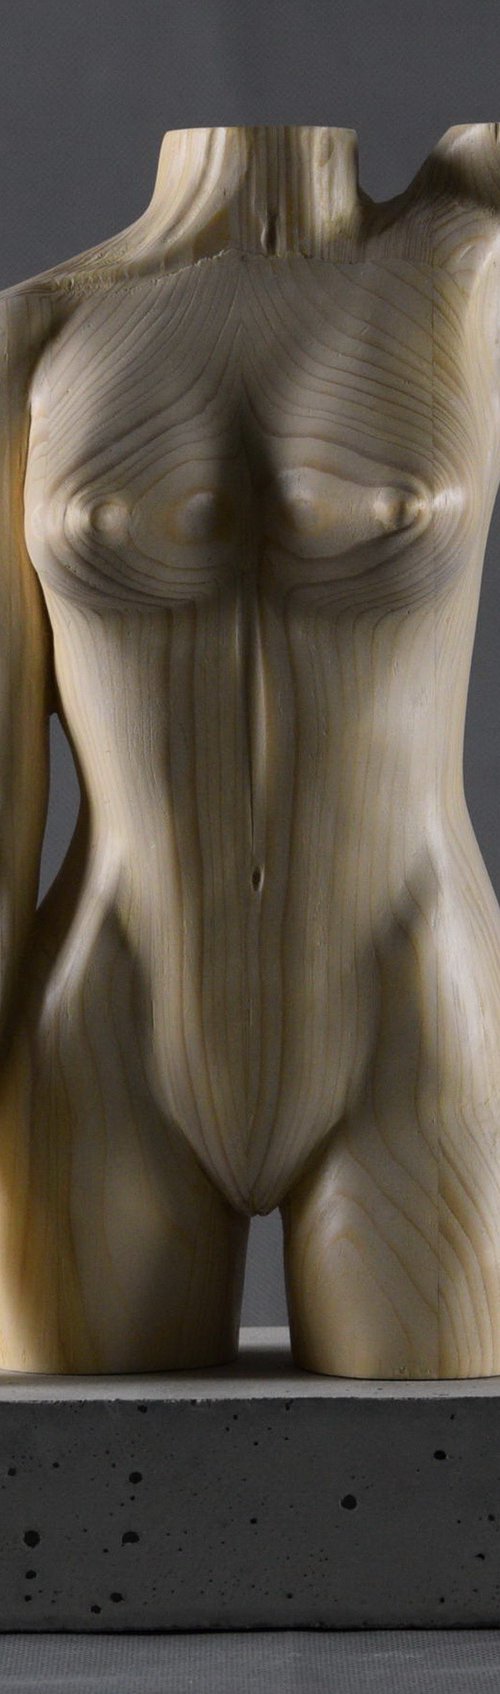 Standing Female Torso by Lee Forester